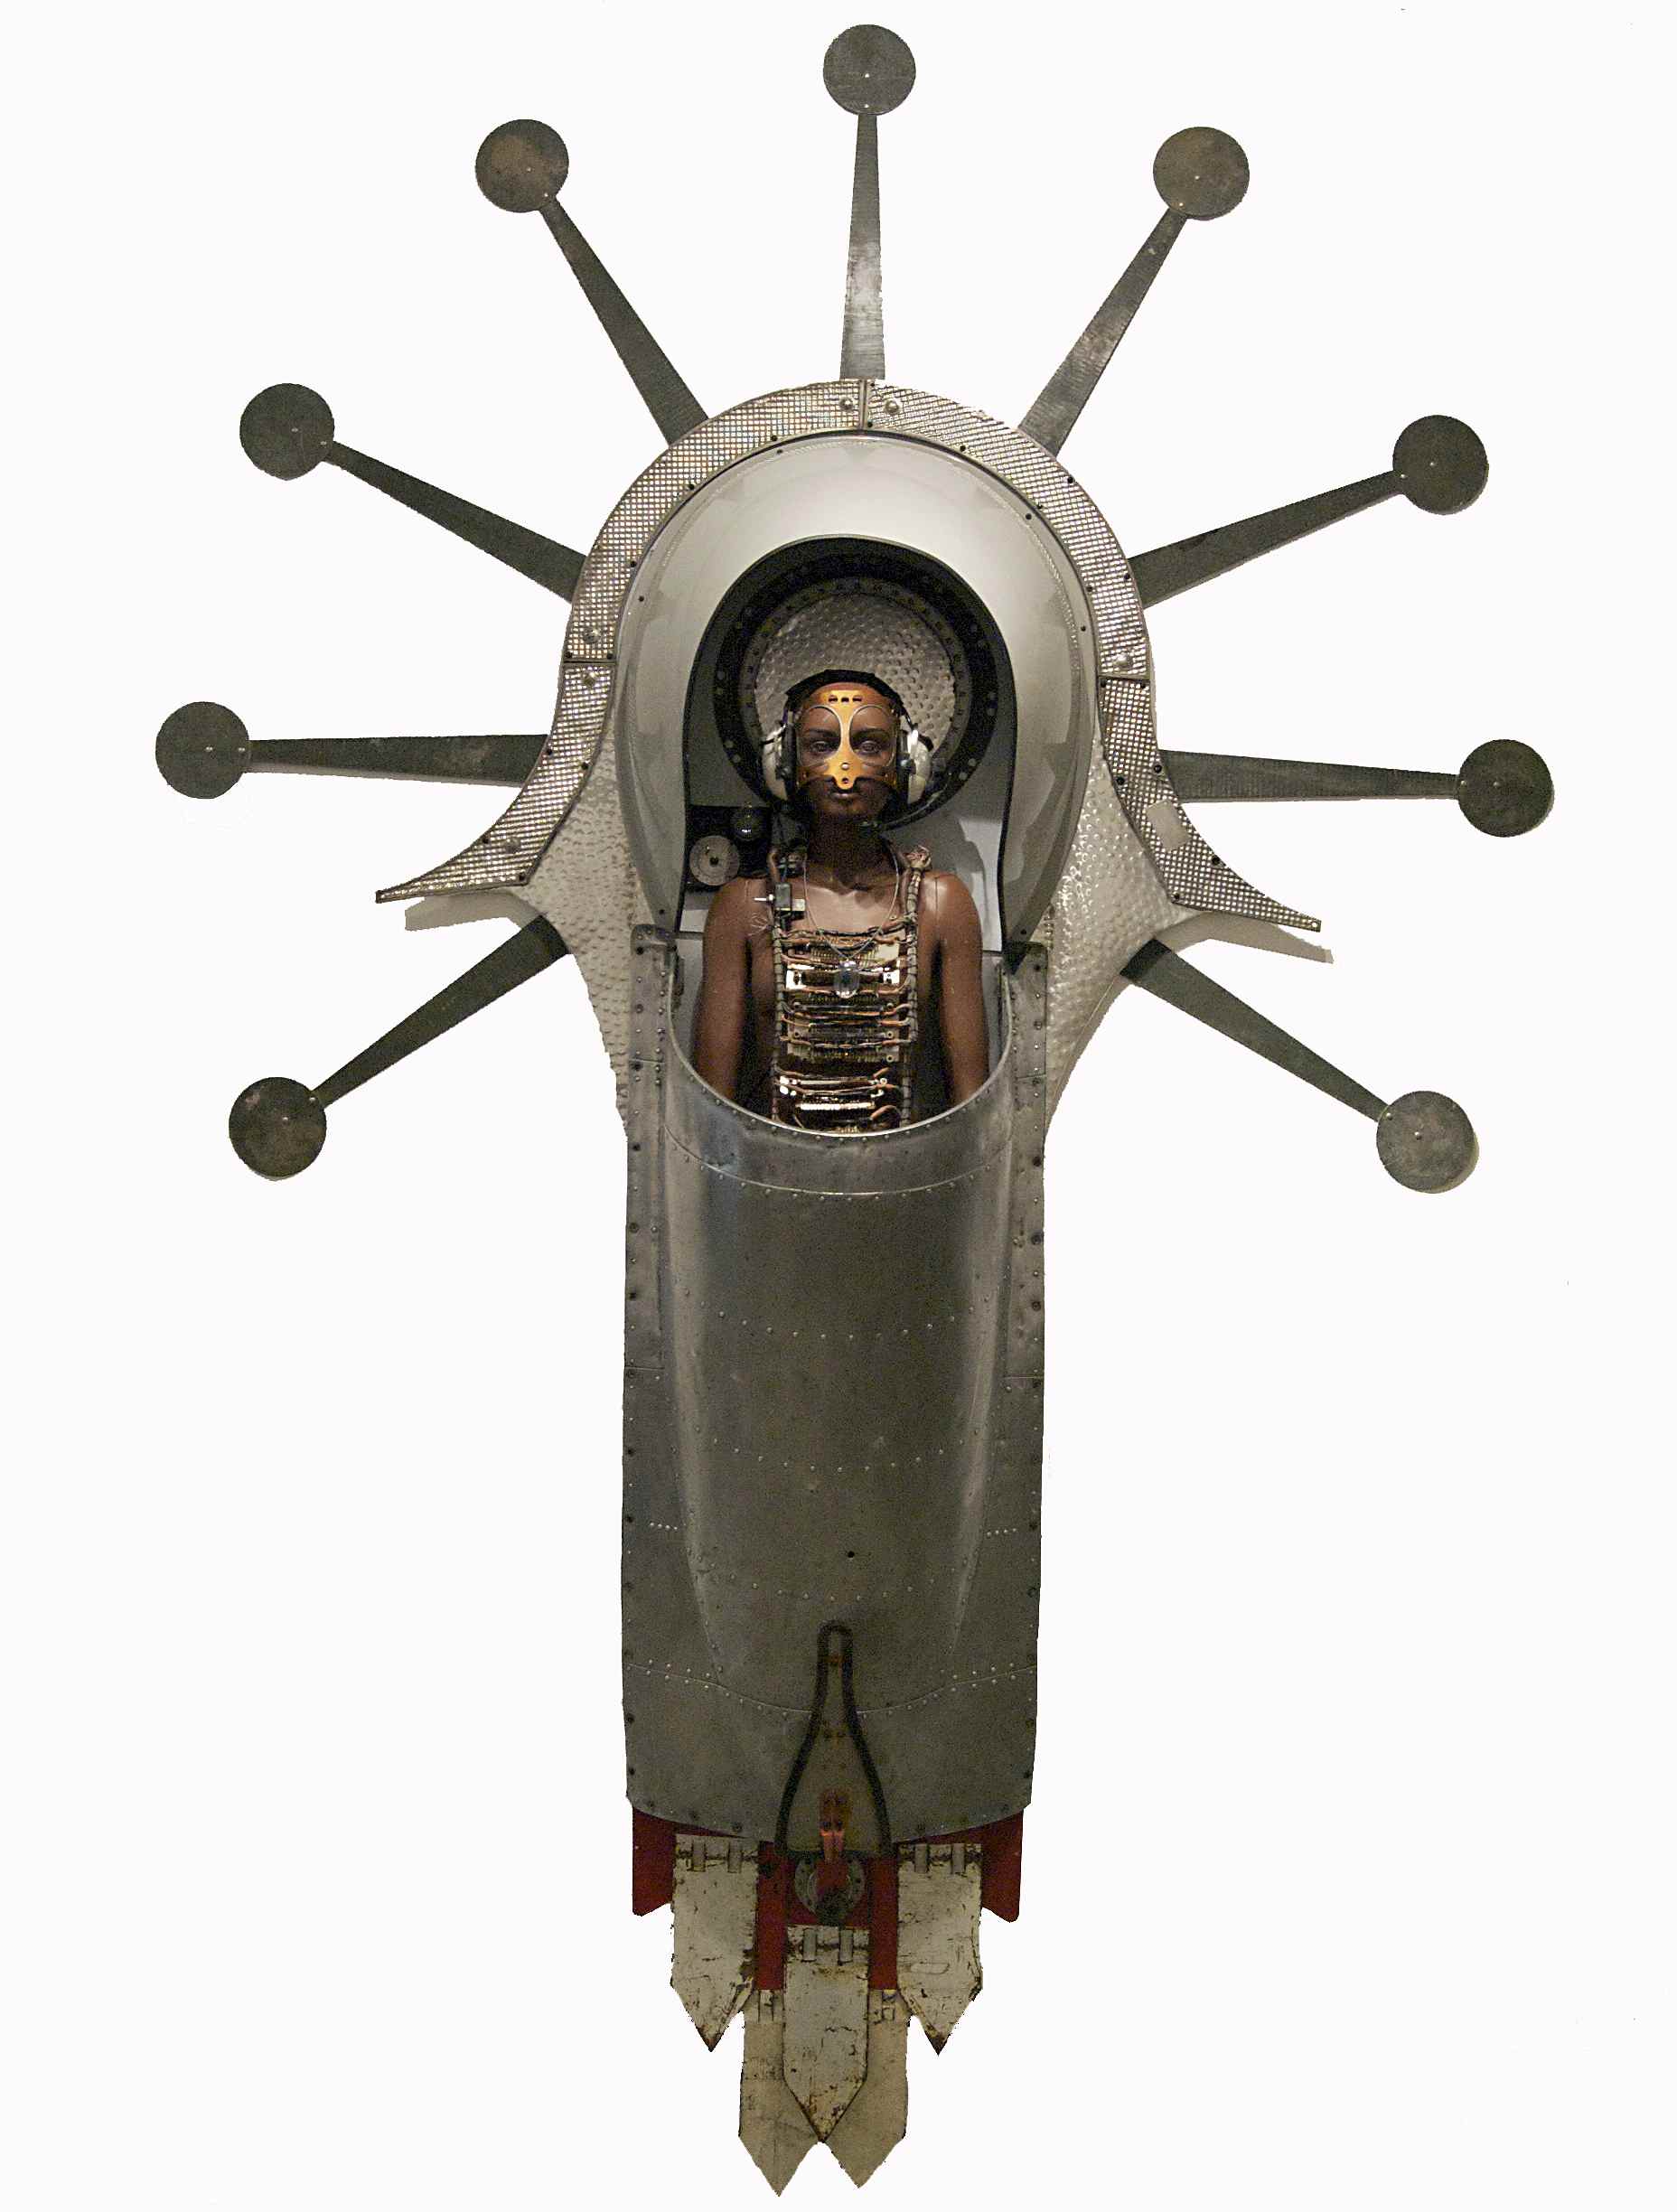 Zak Ové, 'Nubian Return', 2009, Mixed media including seventies rootsein mannequin, aircraft fuselage, telephone box shelter, metal signage, etc., 250 x 150 x 40 cm, Courtesy of Vigo Gallery